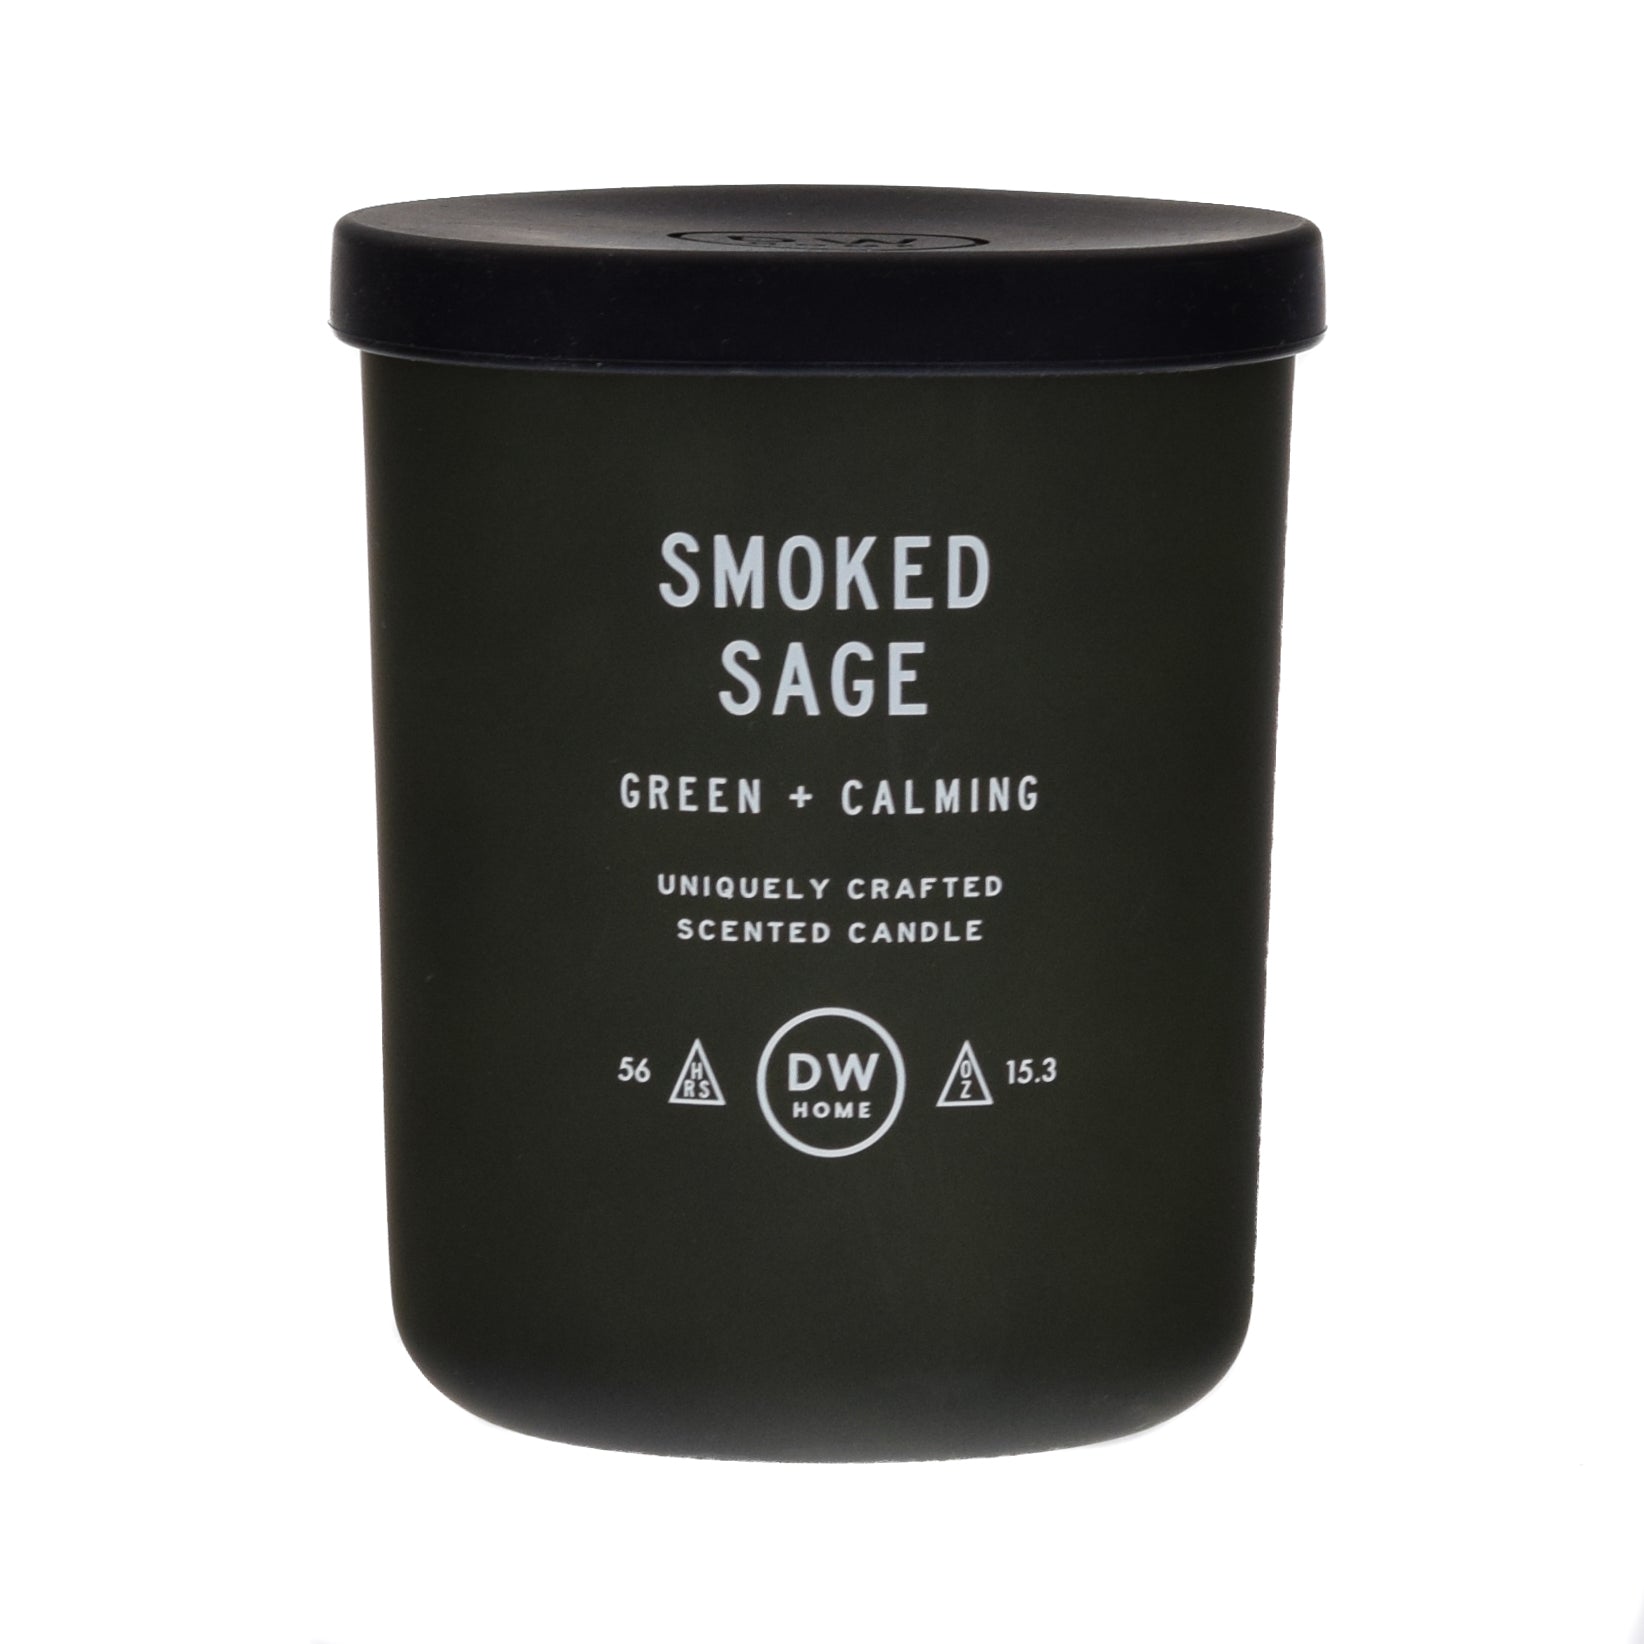 SMOKED N1 GREEN CALMING UNIQUELY CRAFTED SCENTED CANDLE N e 